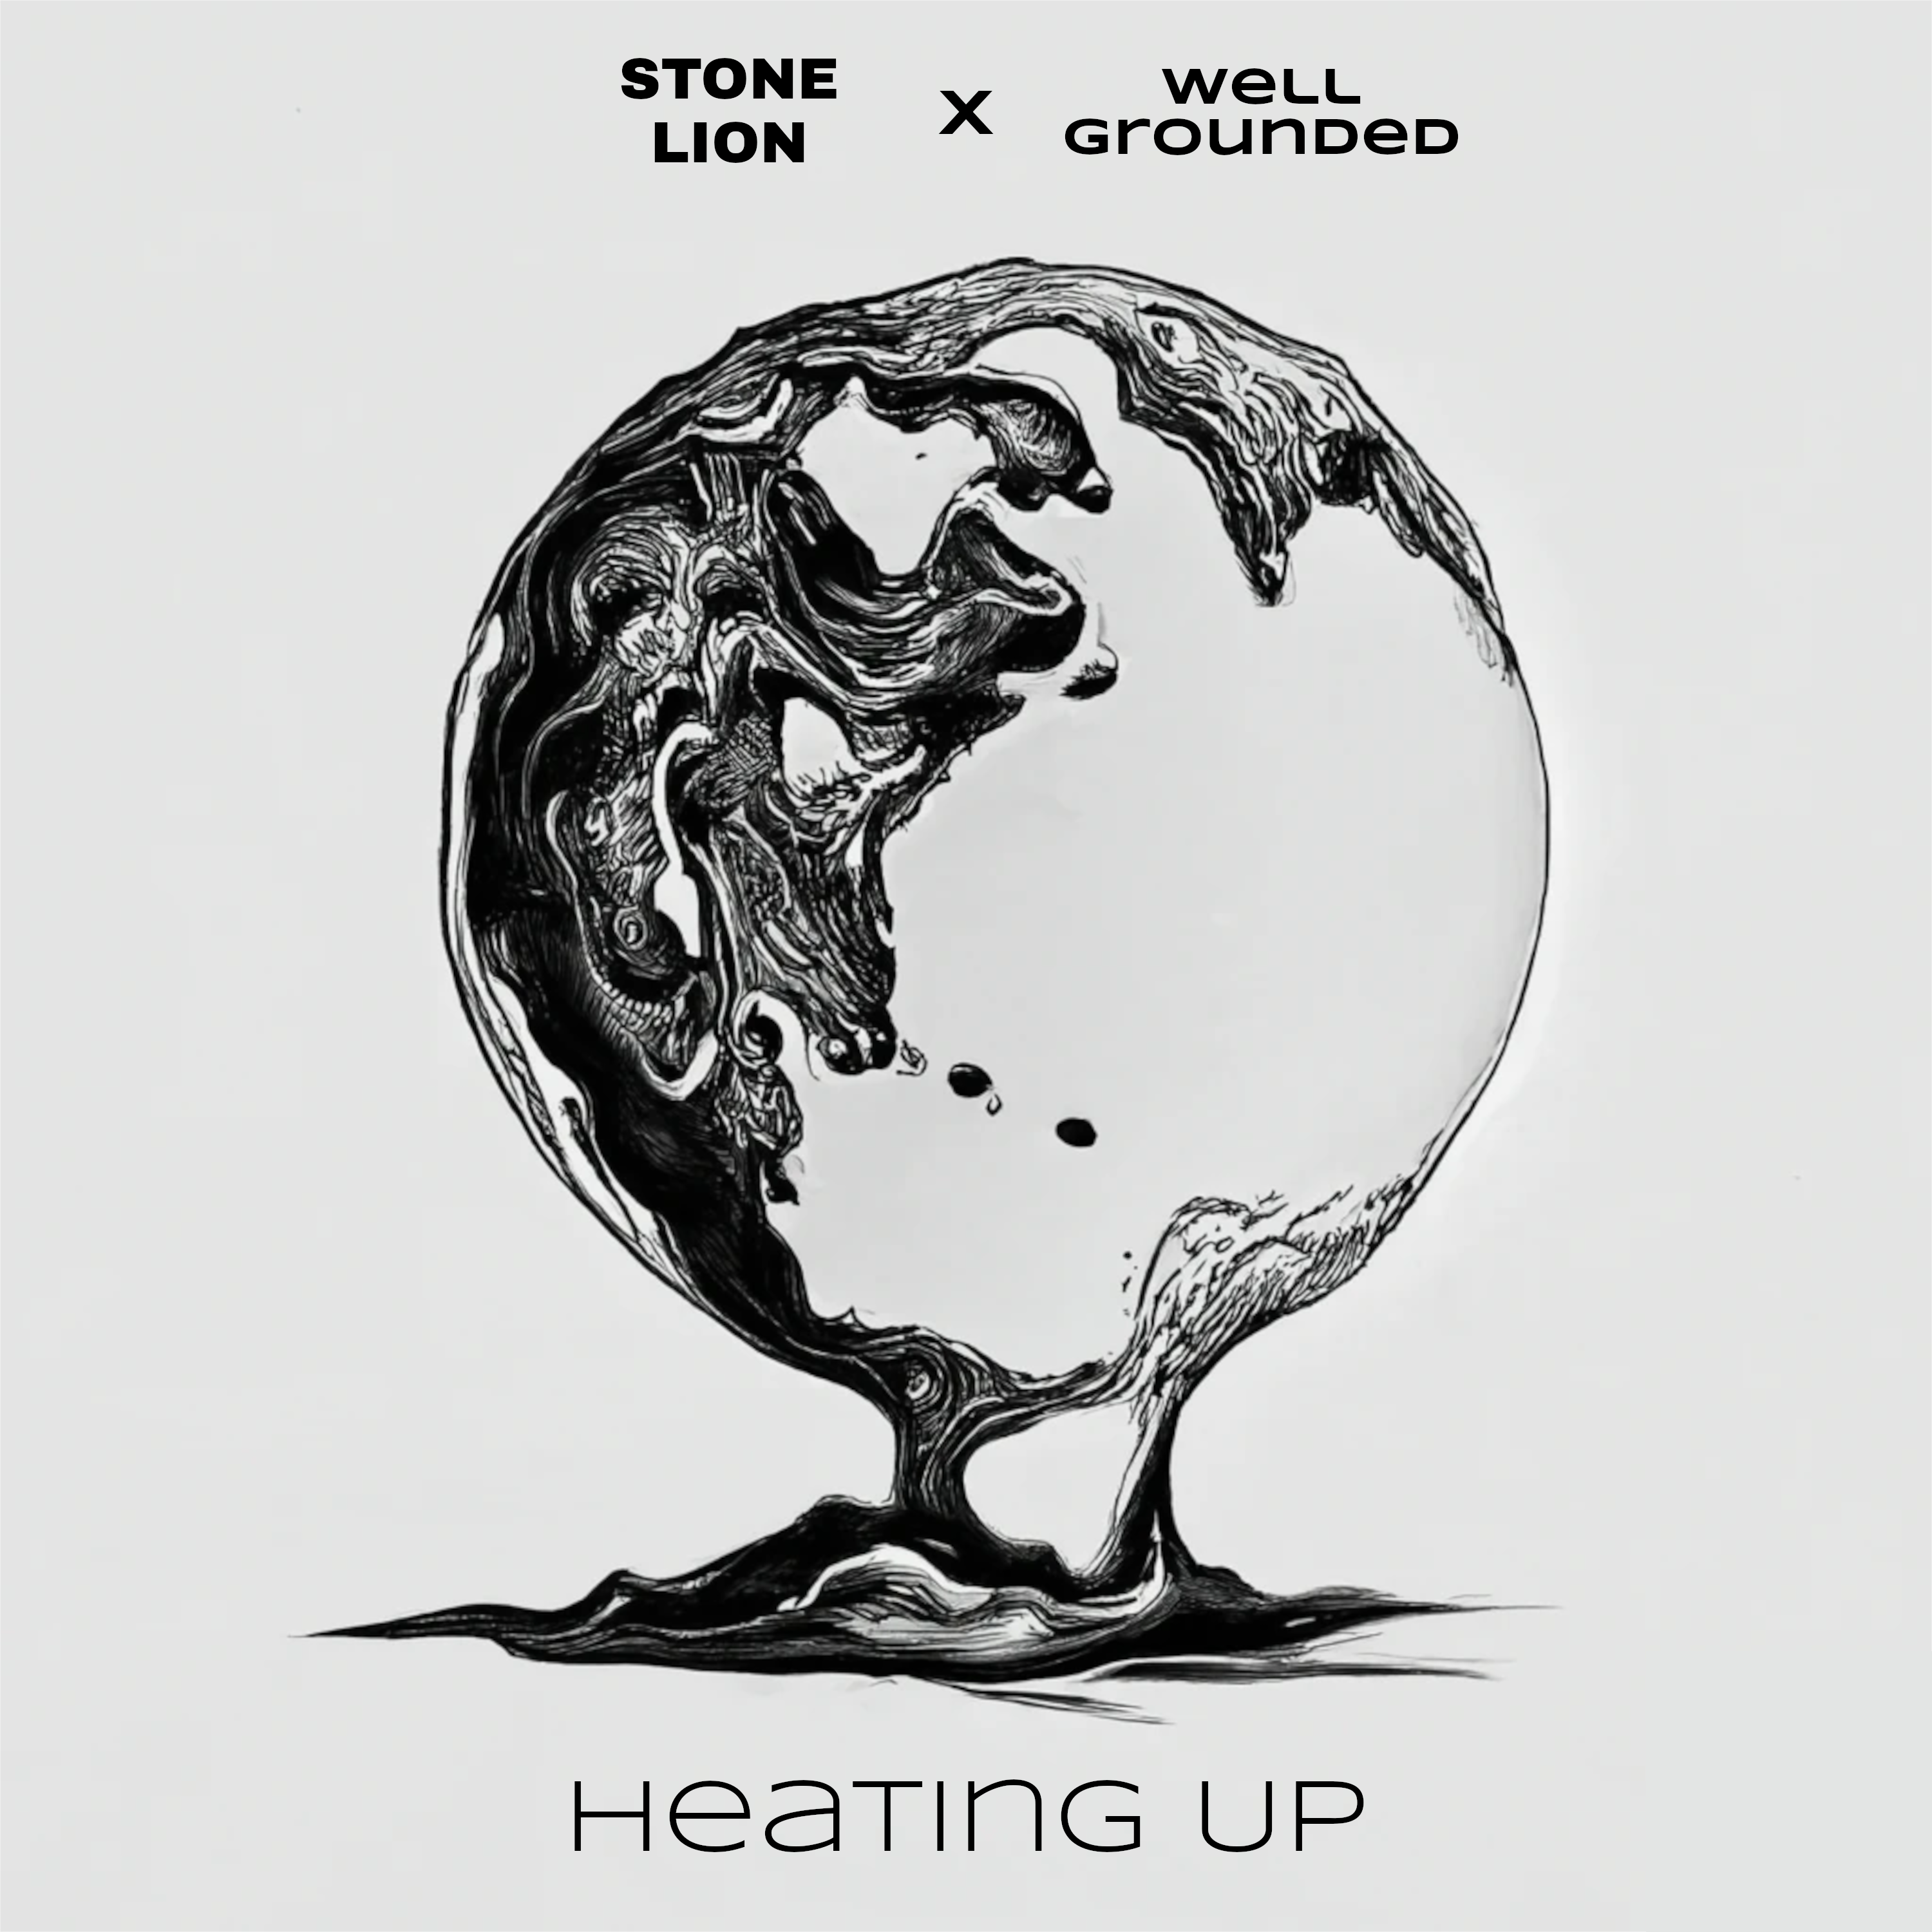 Cover art for 'Heating Up' by Stone Lion x Well Grounded a reggae song about the climate crisis.